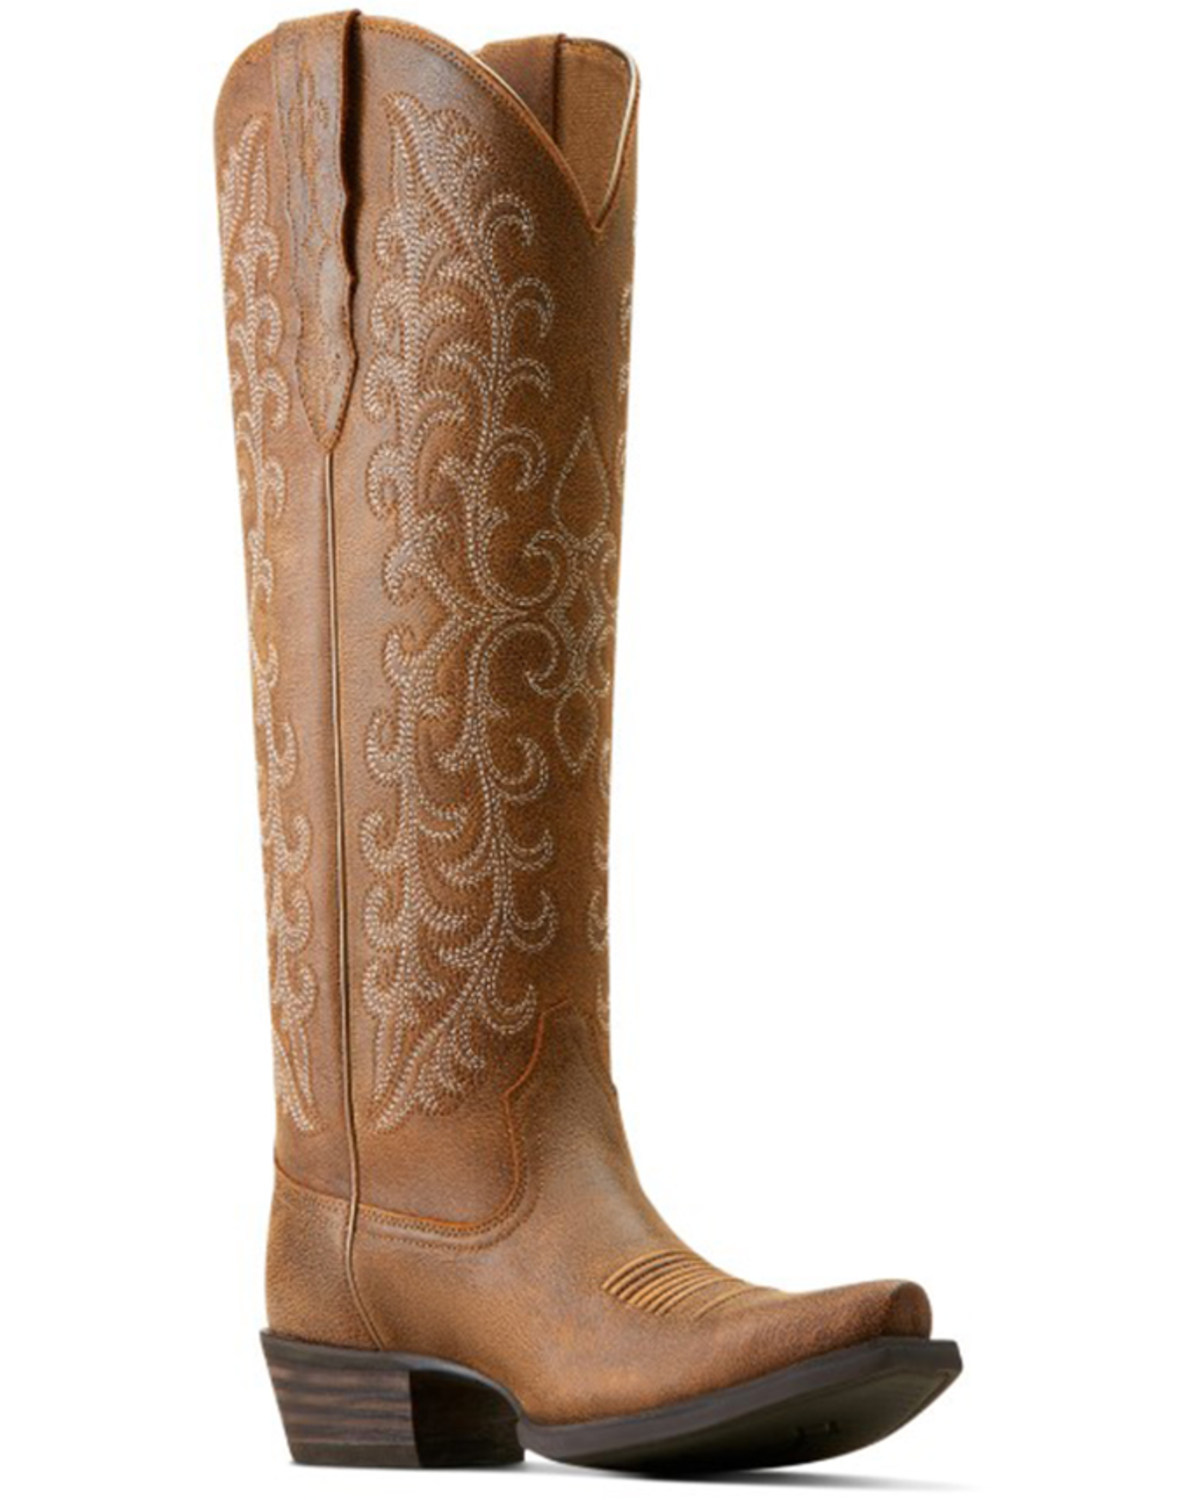 Ariat Women's Tallahassee Stretchfit Western Boots - Snip Toe